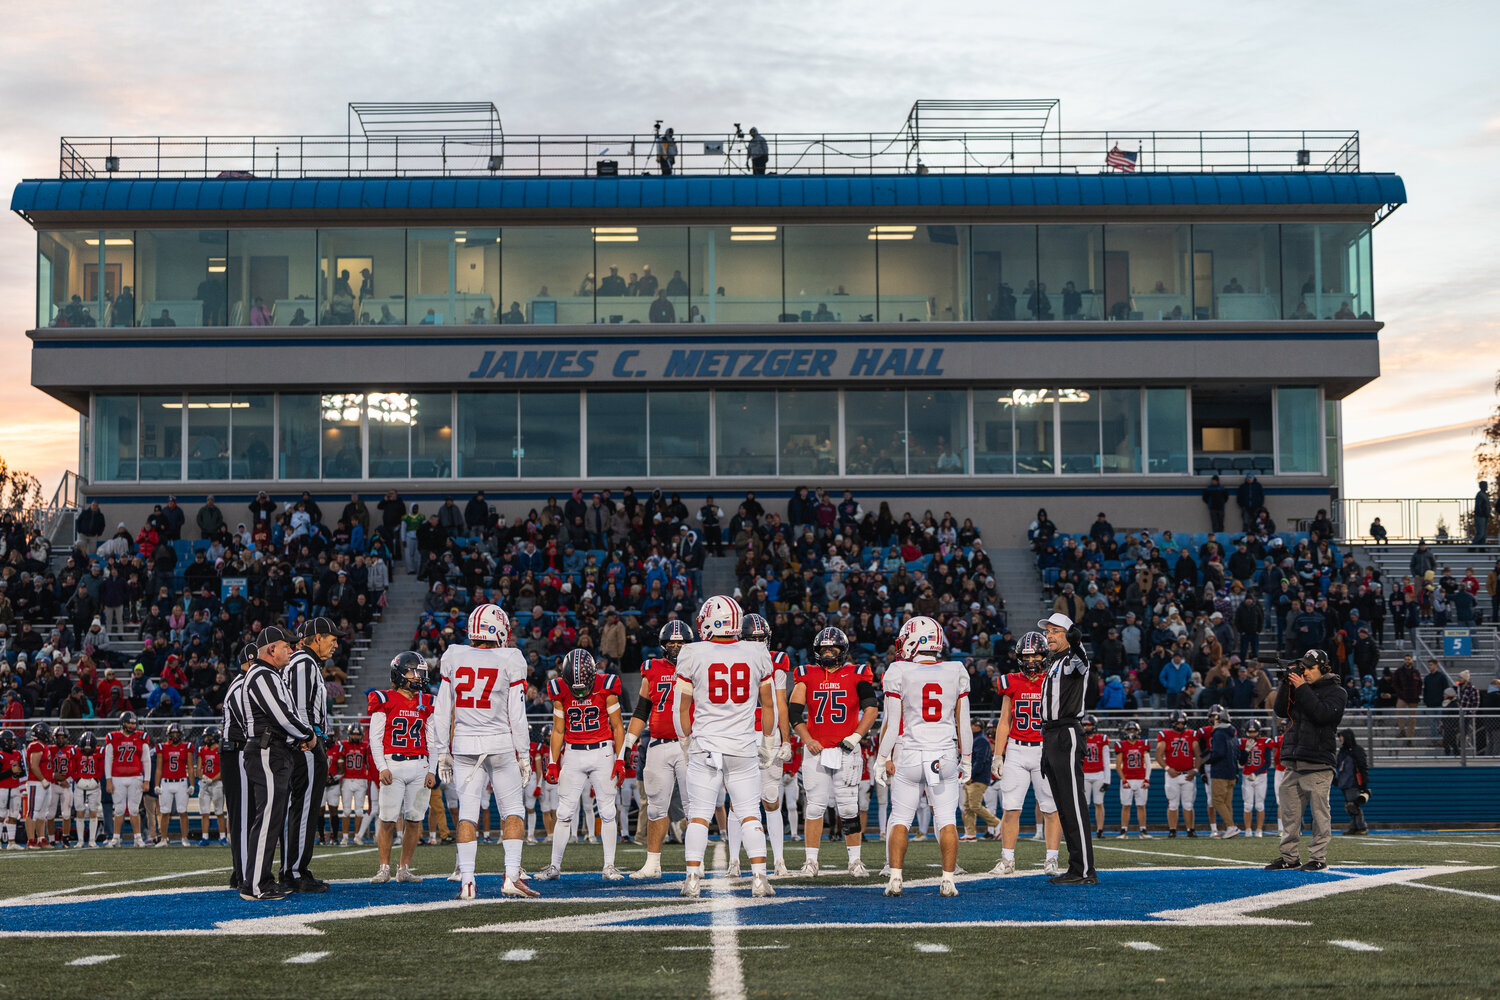 The Redmen and Cyclones battled for the champion title during a nail-biting game at Hoftsra’s Shuart Stadium.